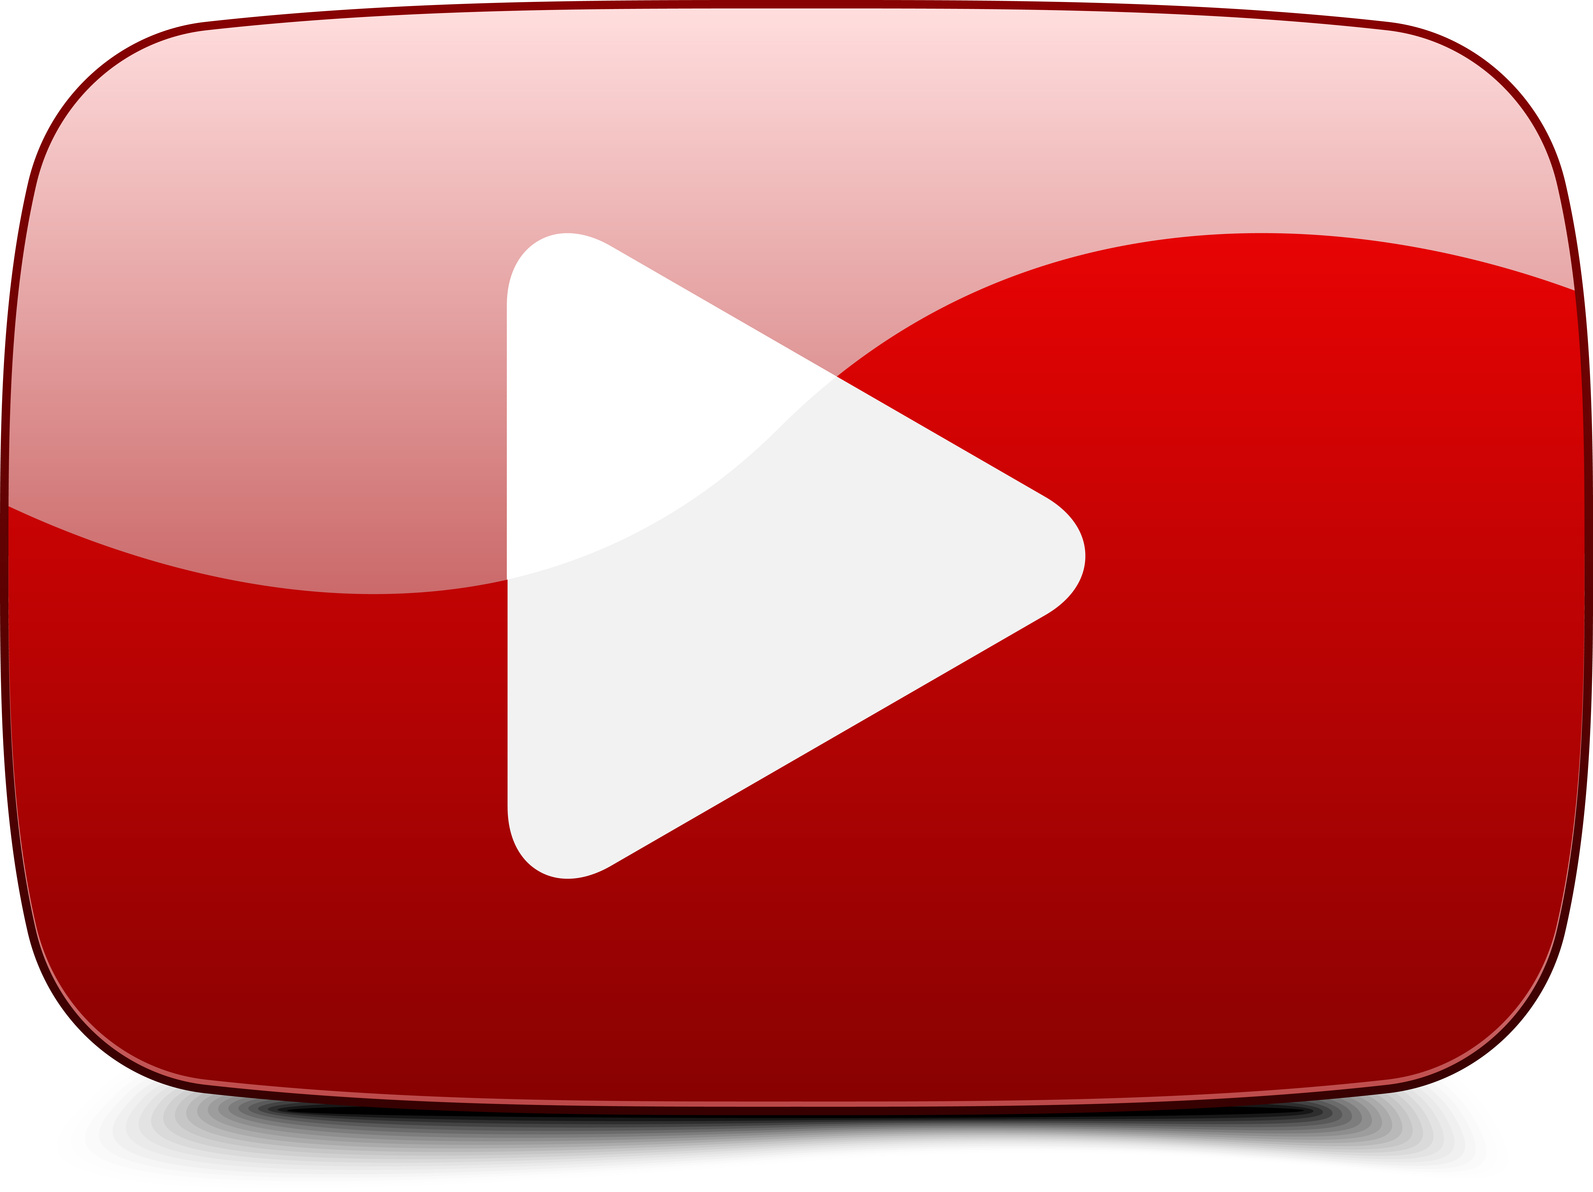 Free Youtube Play Logo Png, Download Free Clip Art, Free Clip Art Pluspng.com  - Youtube Play, Transparent background PNG HD thumbnail